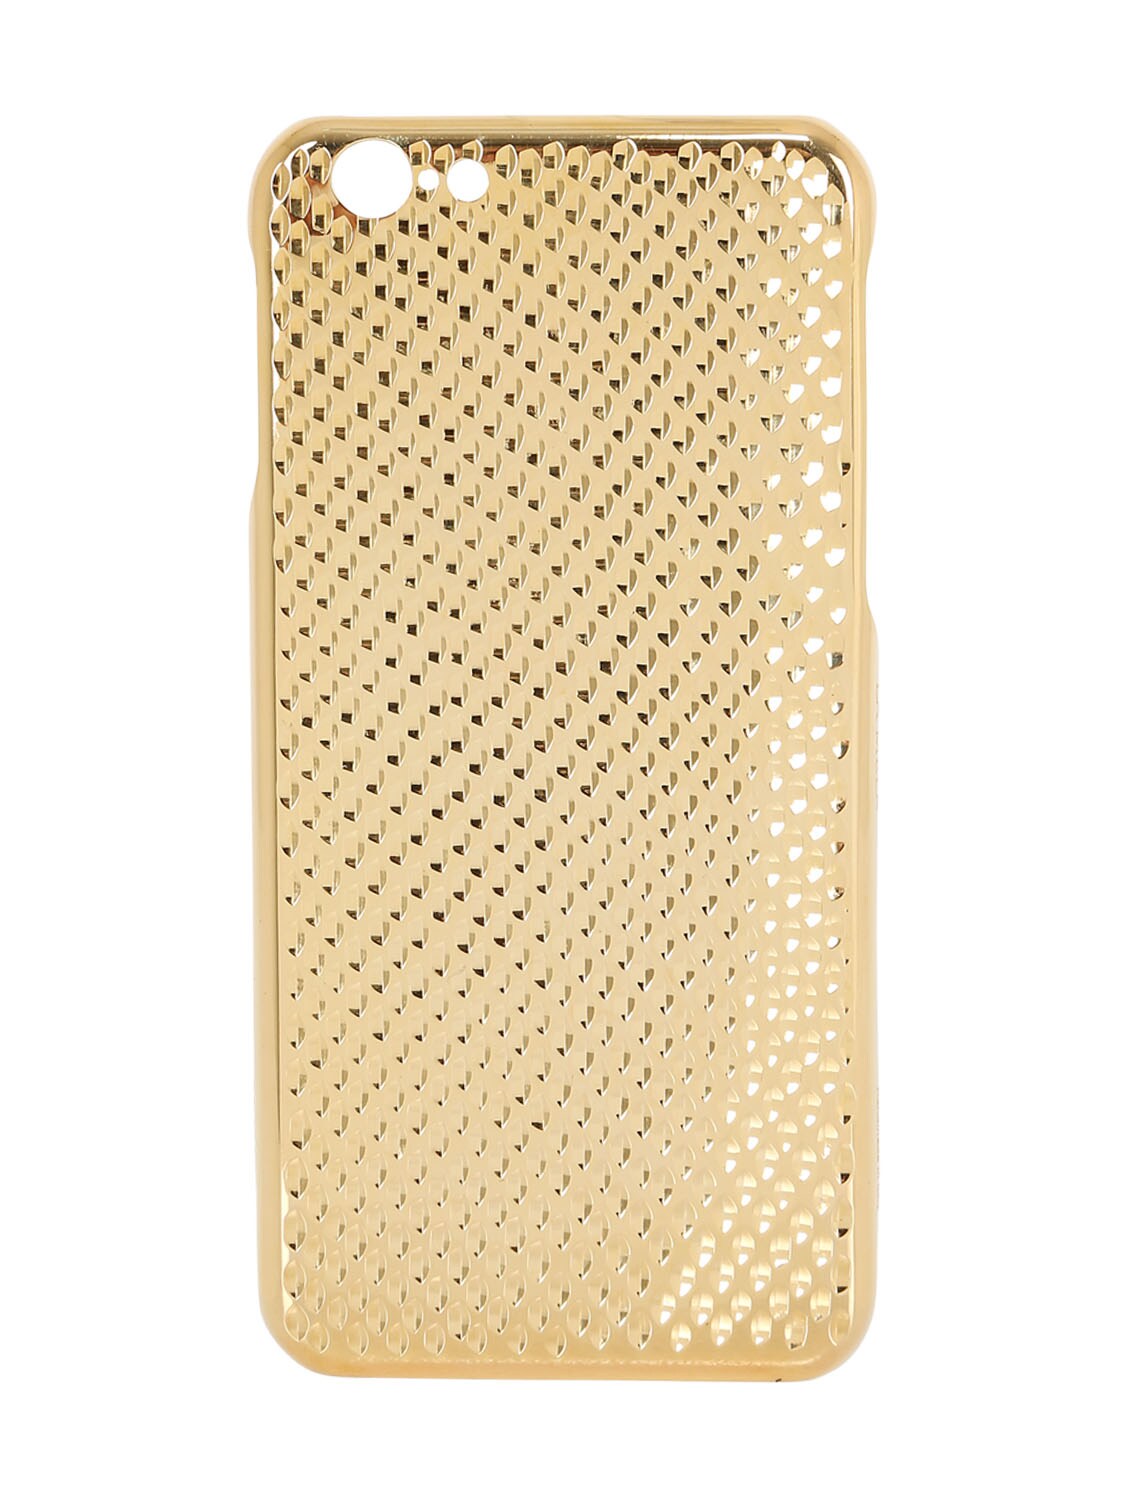 COBRA 18KT GOLD PLATED IPHONE 6 CASE